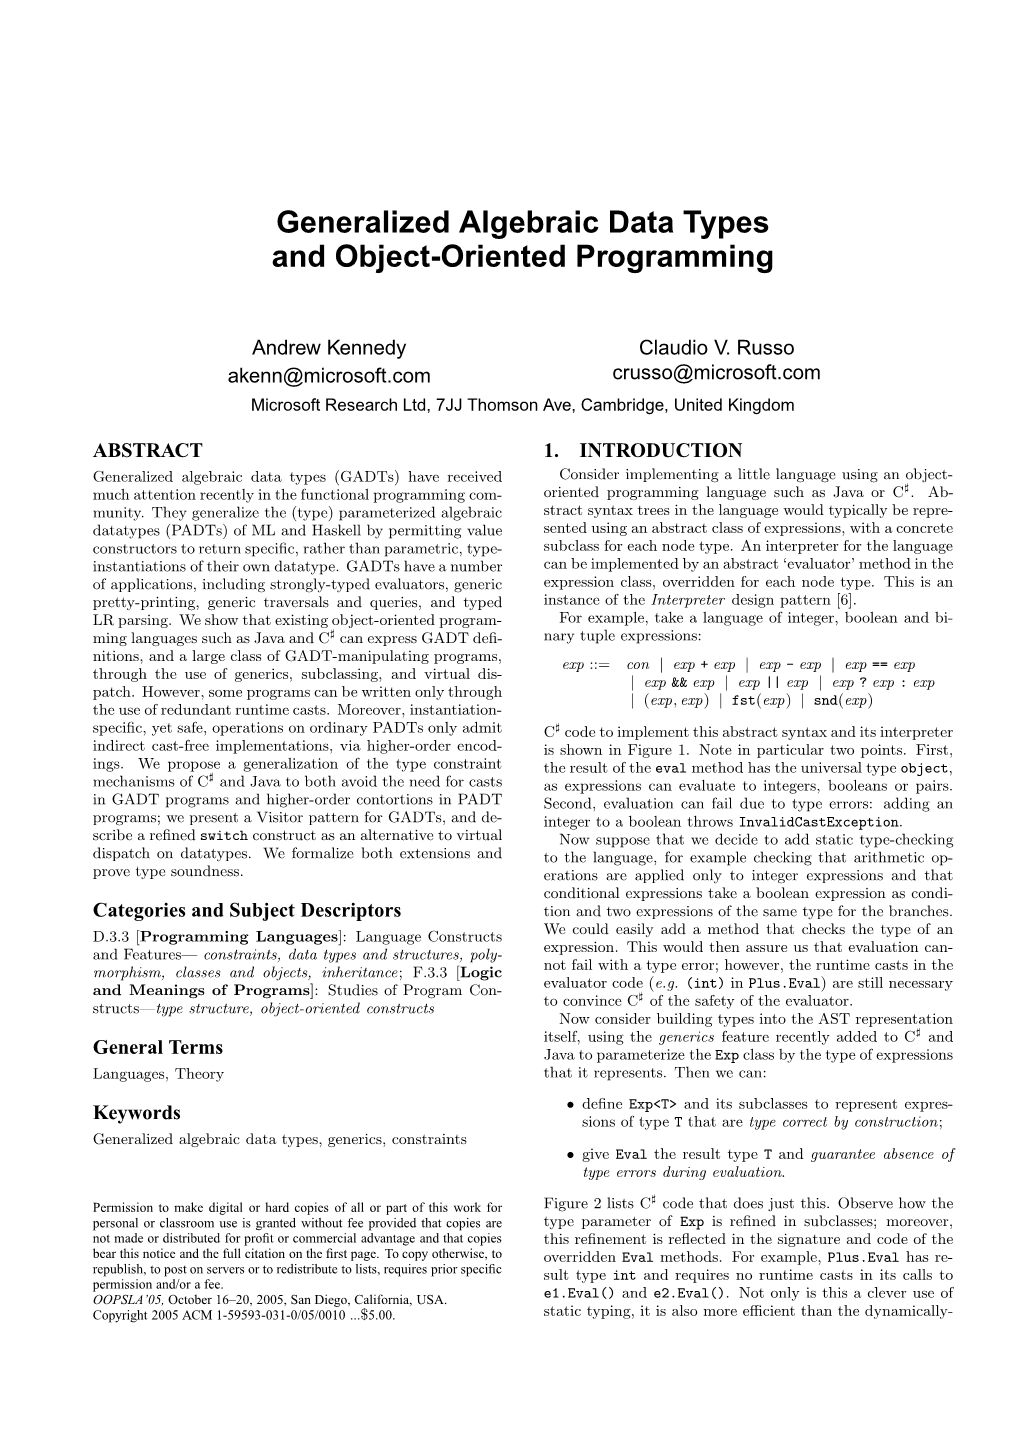 Generalized Algebraic Data Types and Object-Oriented Programming